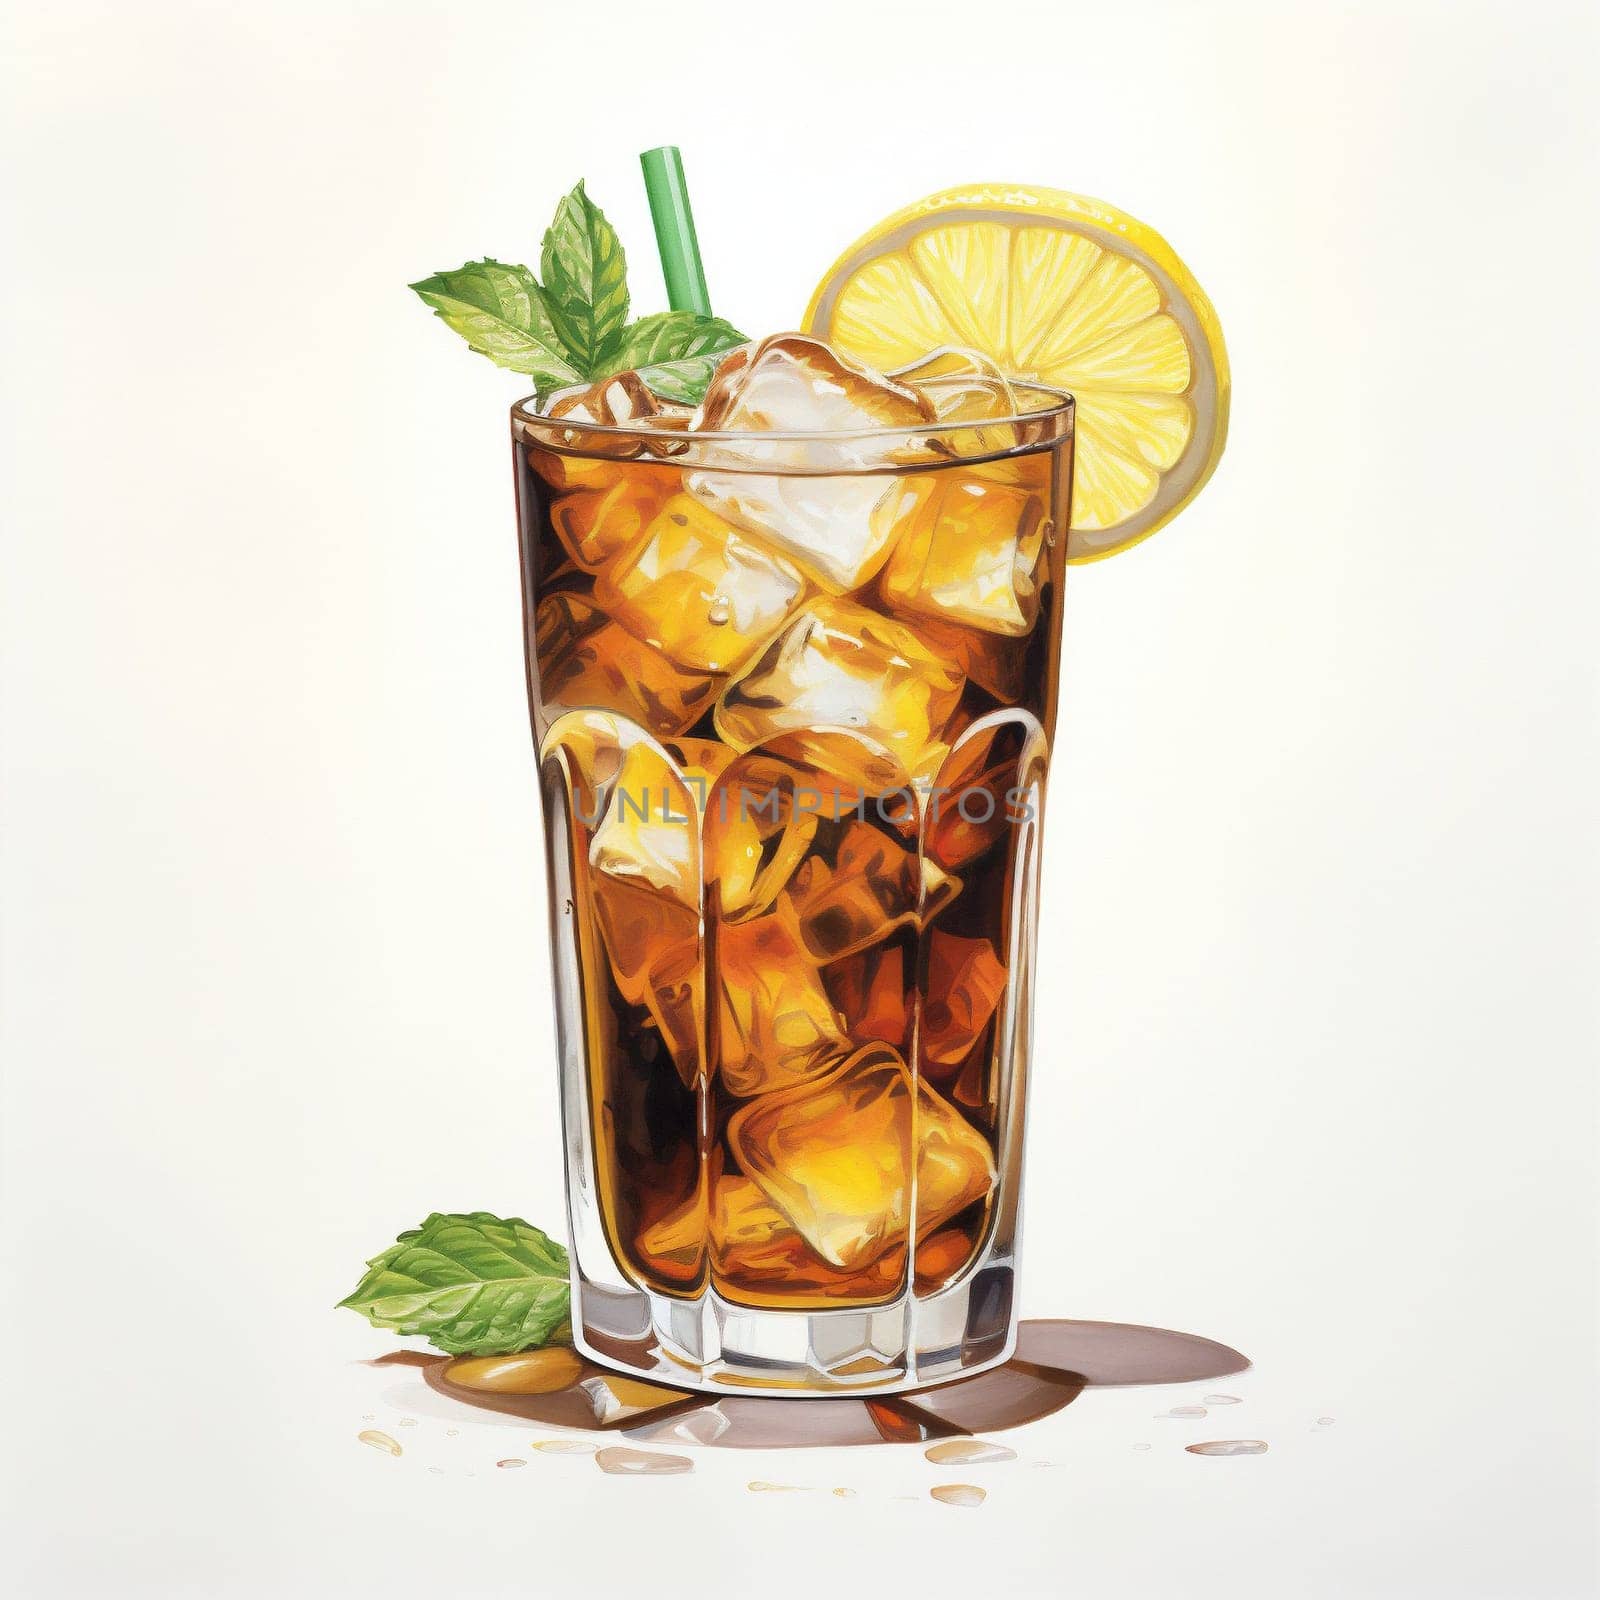 Cocktail Day Lon Island Ice Tea with Cola, Ice and Mint Leaves. by Rina_Dozornaya